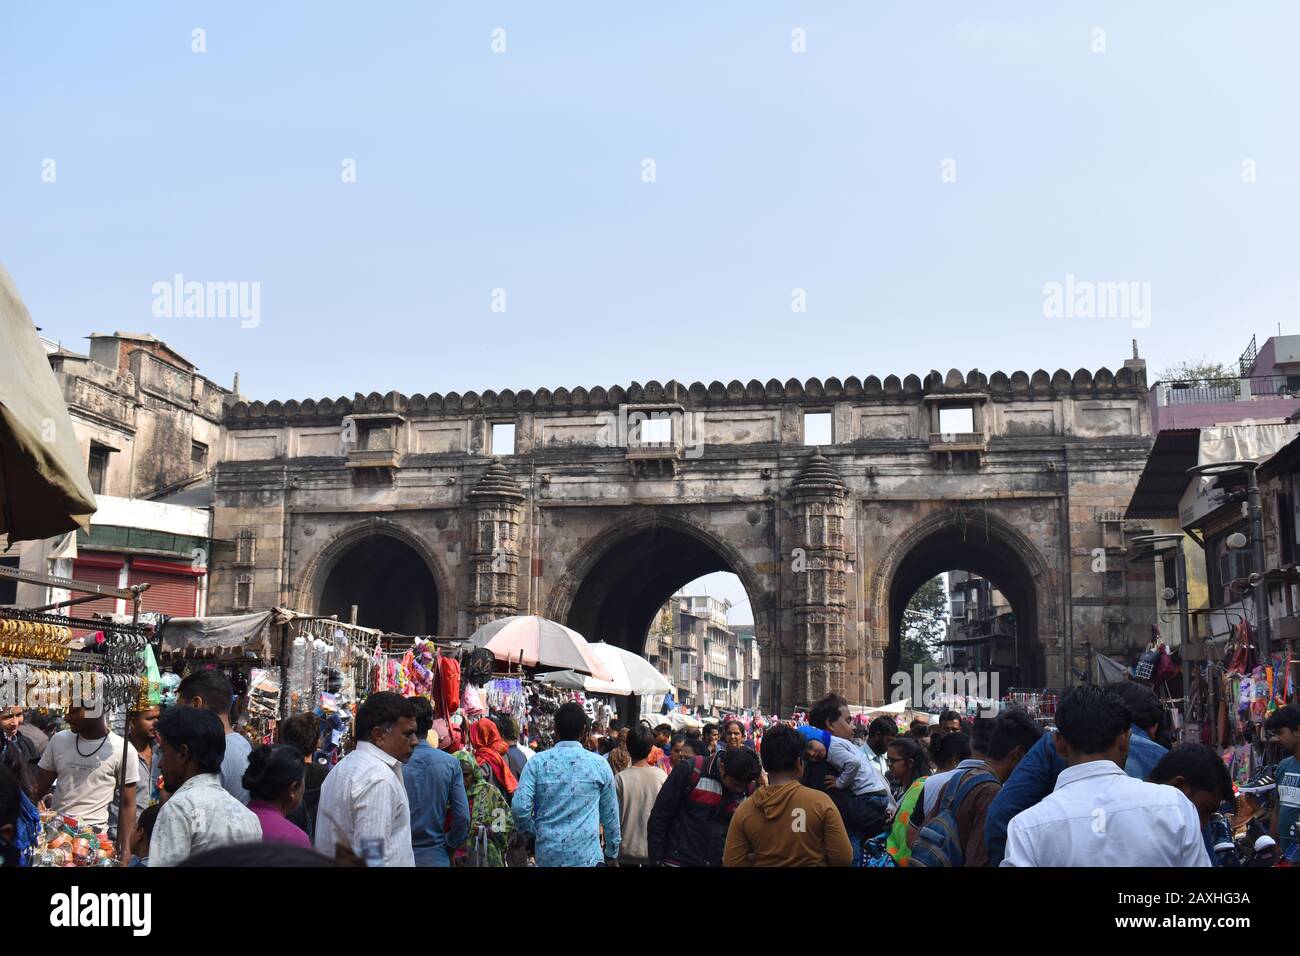 Gujarat, India, January 2020, Teen Darwaja, architectural marvel made up of arched gateways, one of the longest and oldest gateways in Ahmedabad Stock Photo